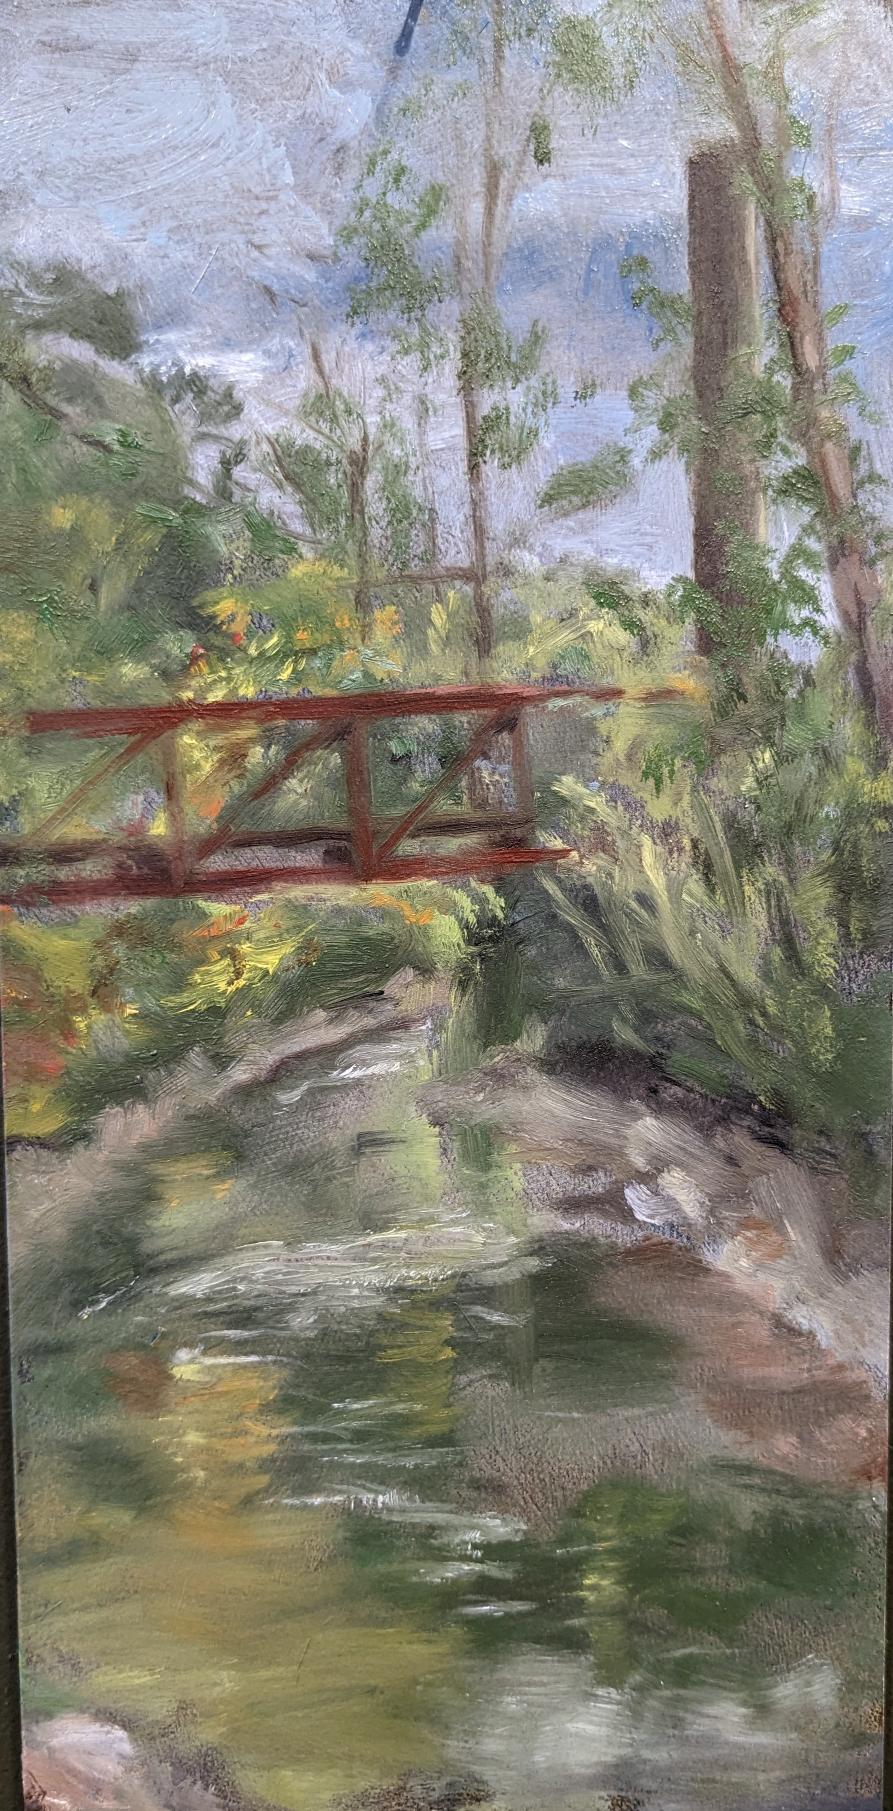 A plein air painting by Cindy Vojnovic of trees and a pedestrian bridge at the Karl Stirner Arts Trail in Easton, Pennsylvania